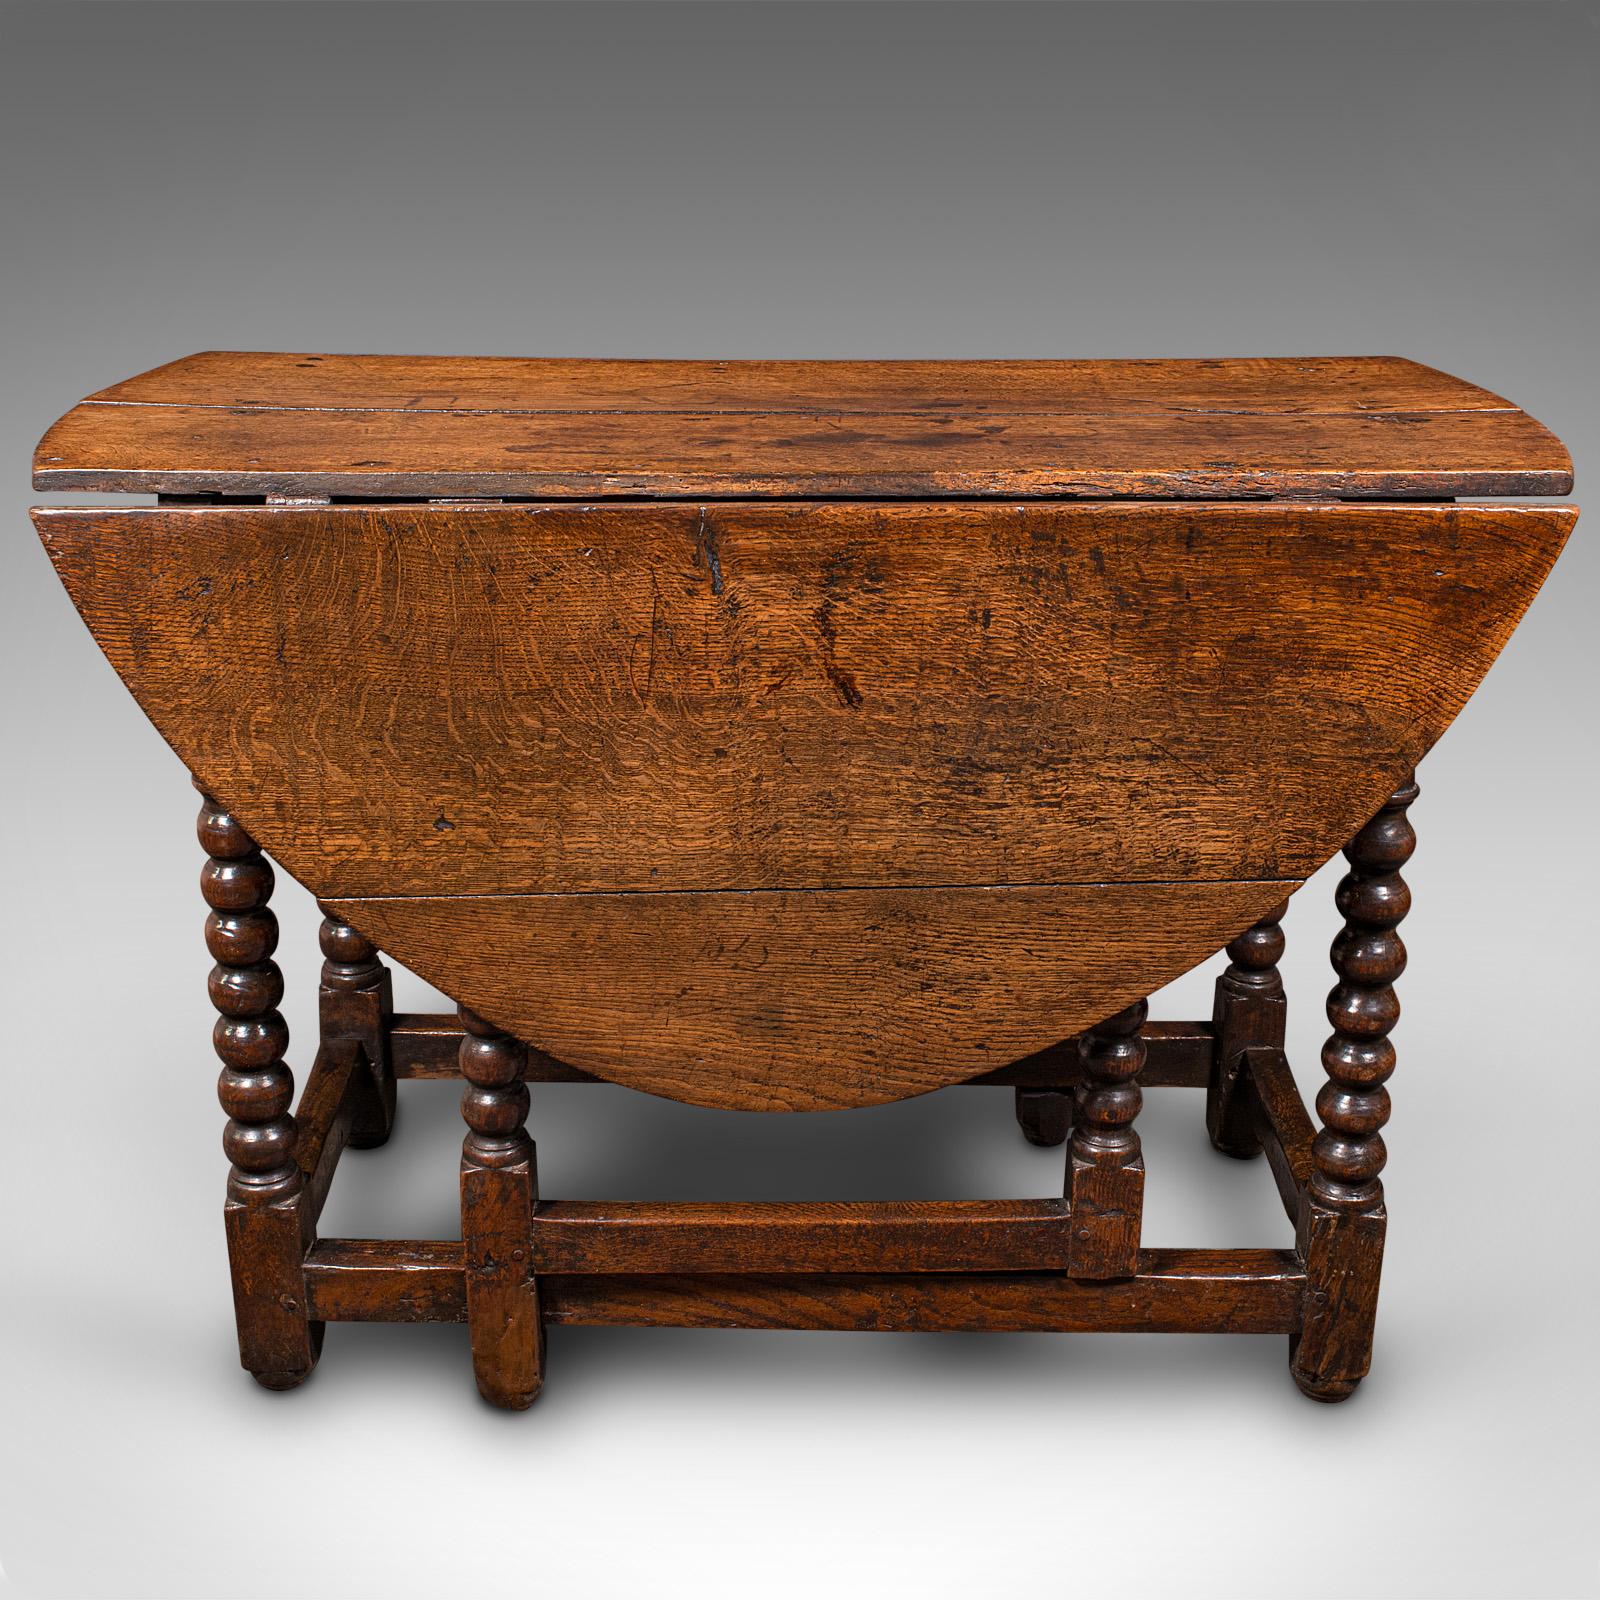 British Antique Gate Leg Table, English, Oak, Oval, Extending, Provincial, William III For Sale